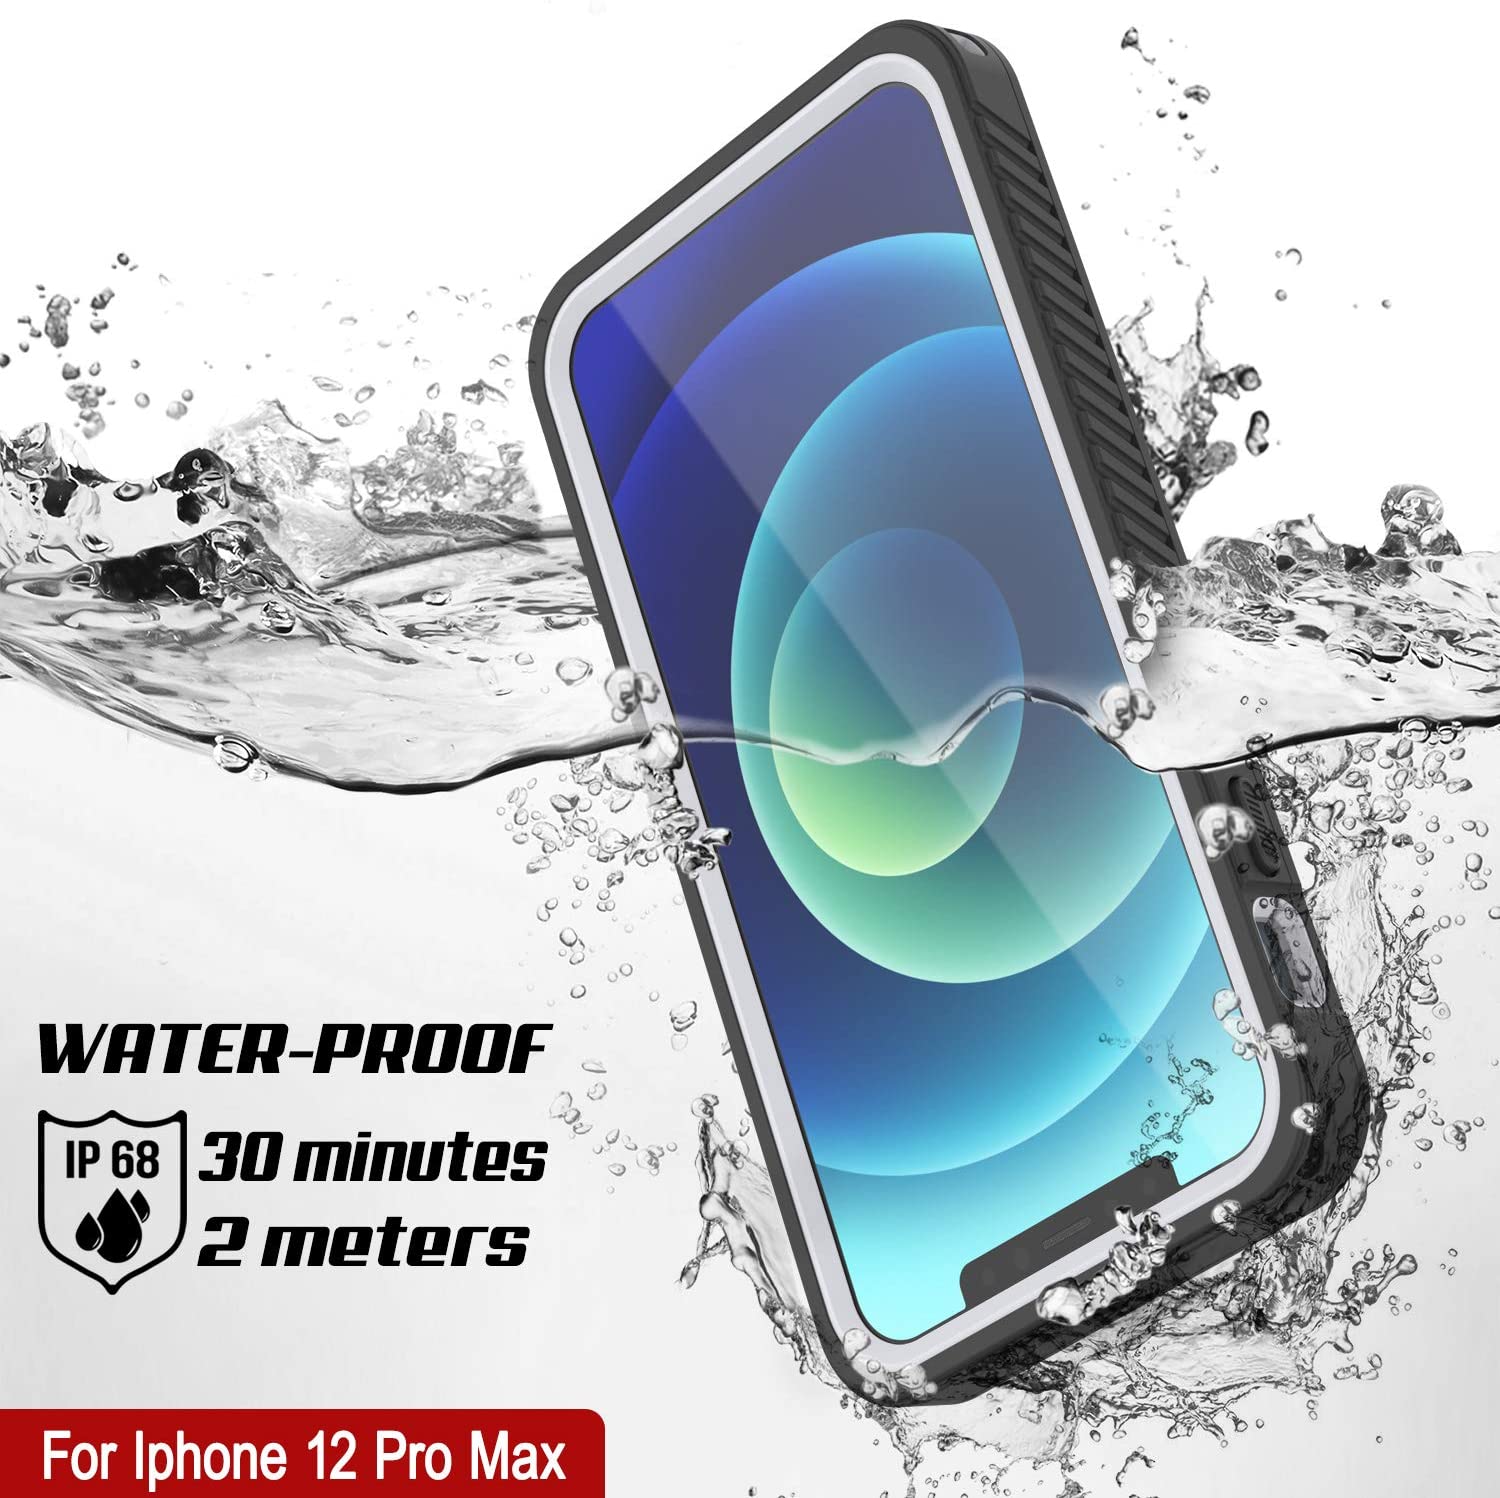 iPhone 12 Pro Max Waterproof Case, Punkcase [Extreme Series] Armor Cover W/ Built In Screen Protector [White]